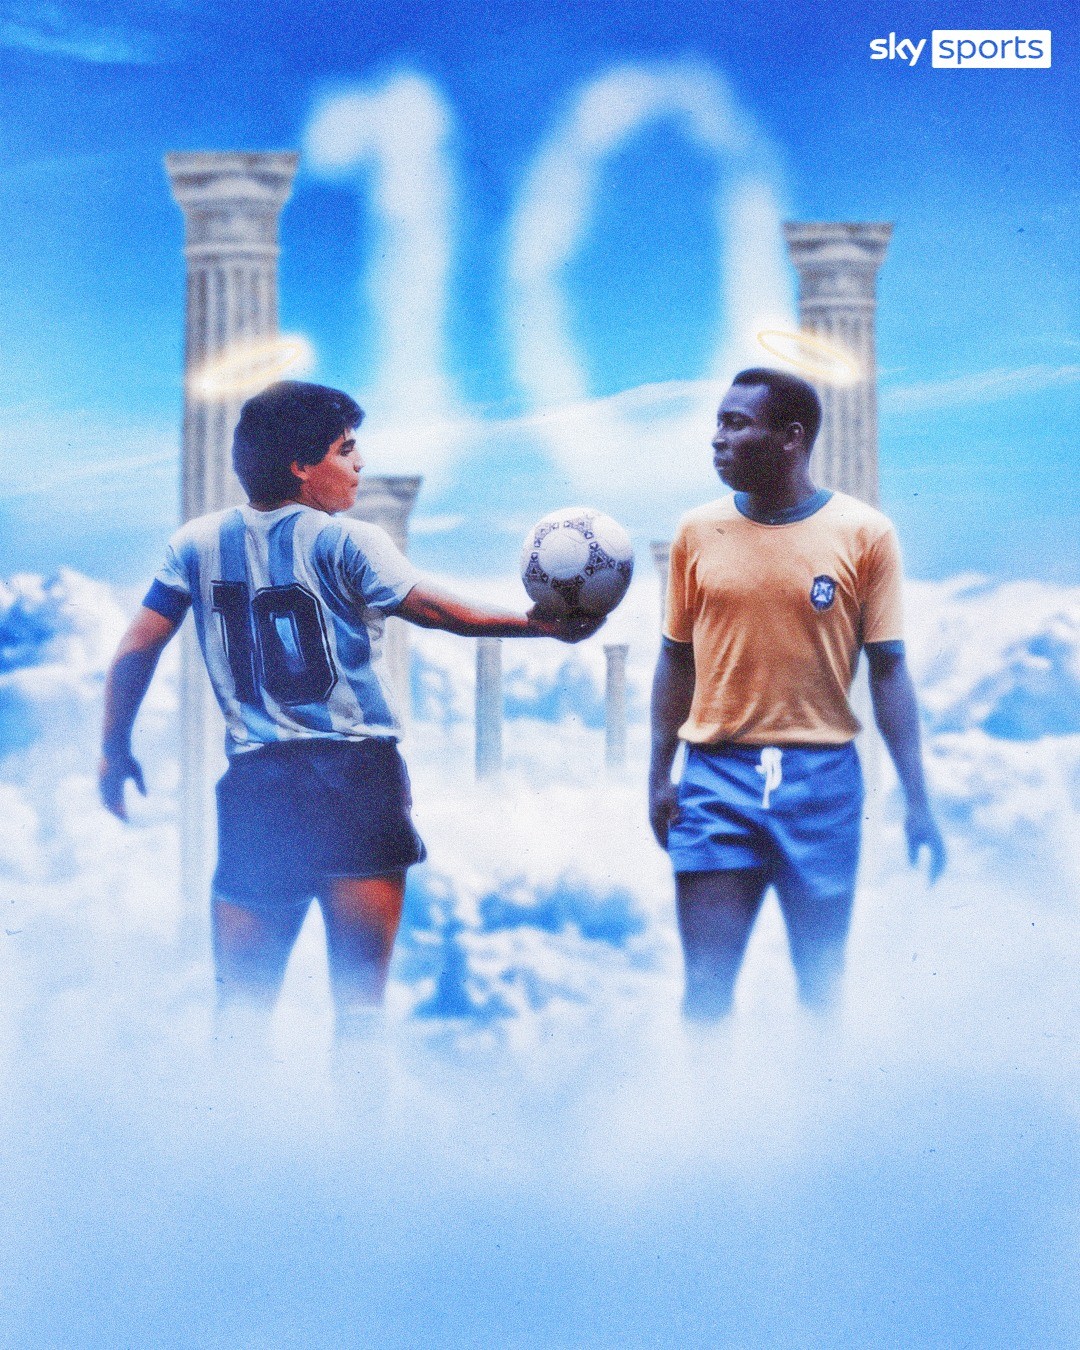 Sky Sports on X: “I hope we will play soccer together in heaven